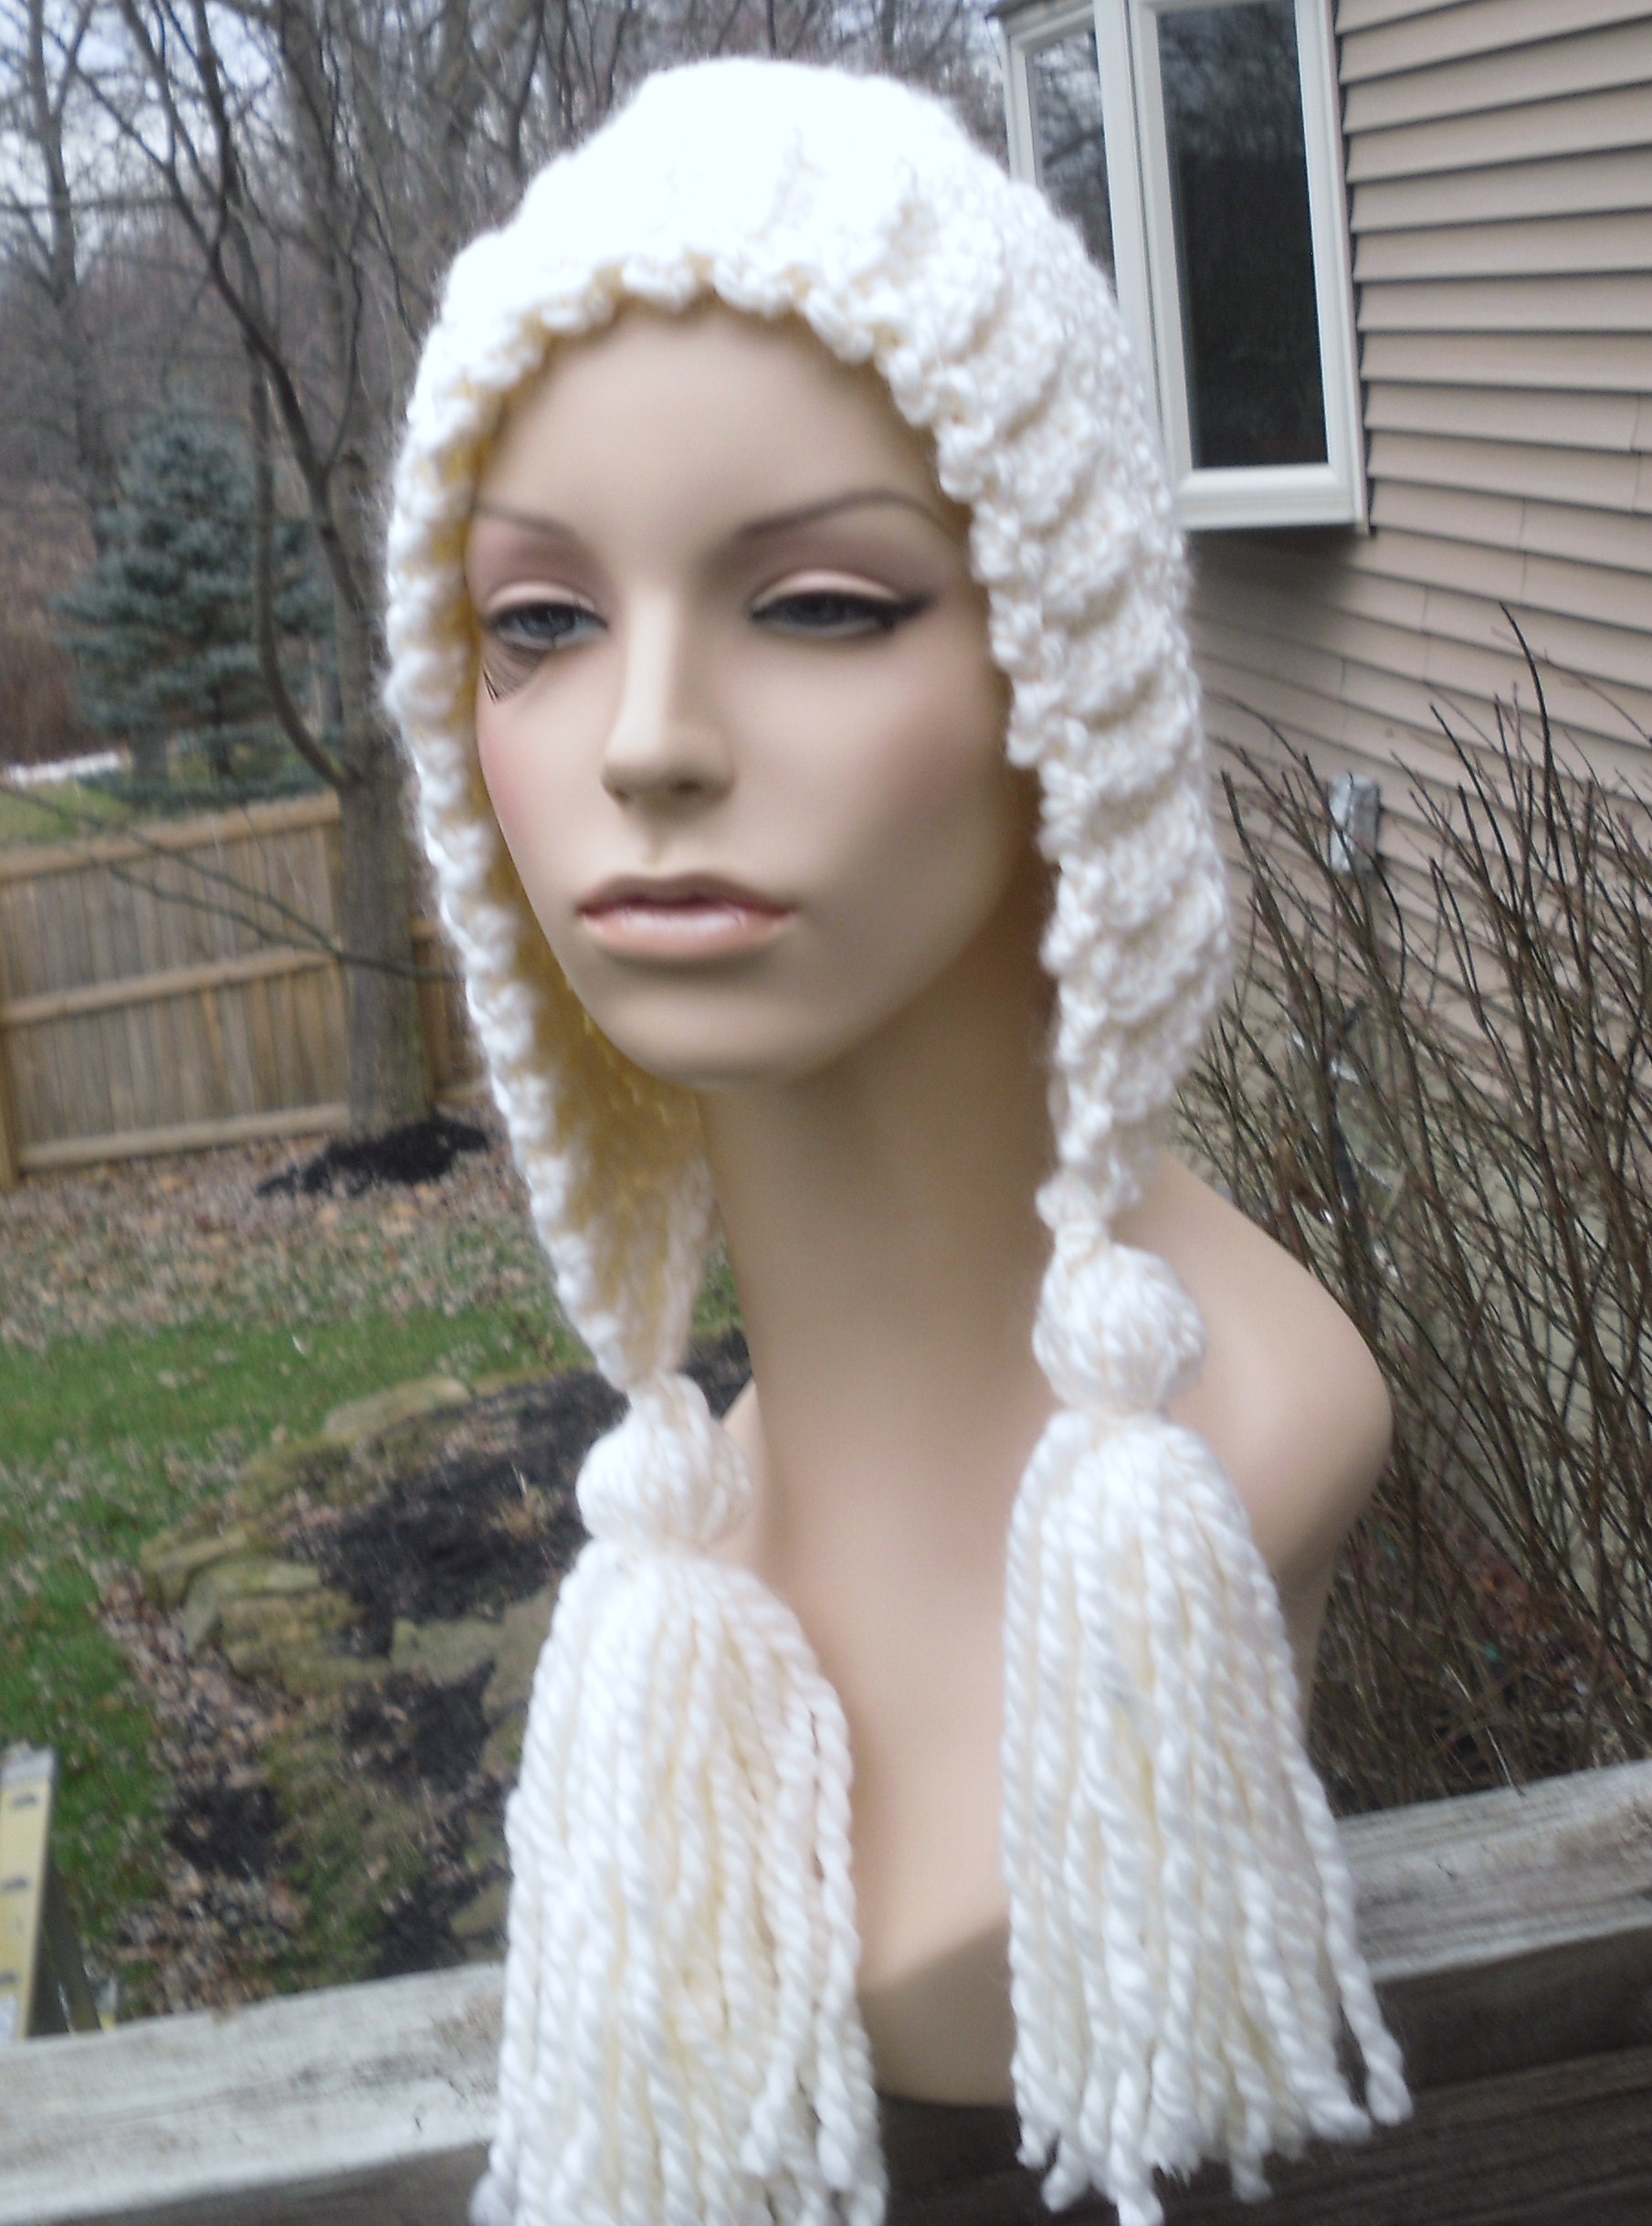 A mannequin wearing a white handwoven head scarf